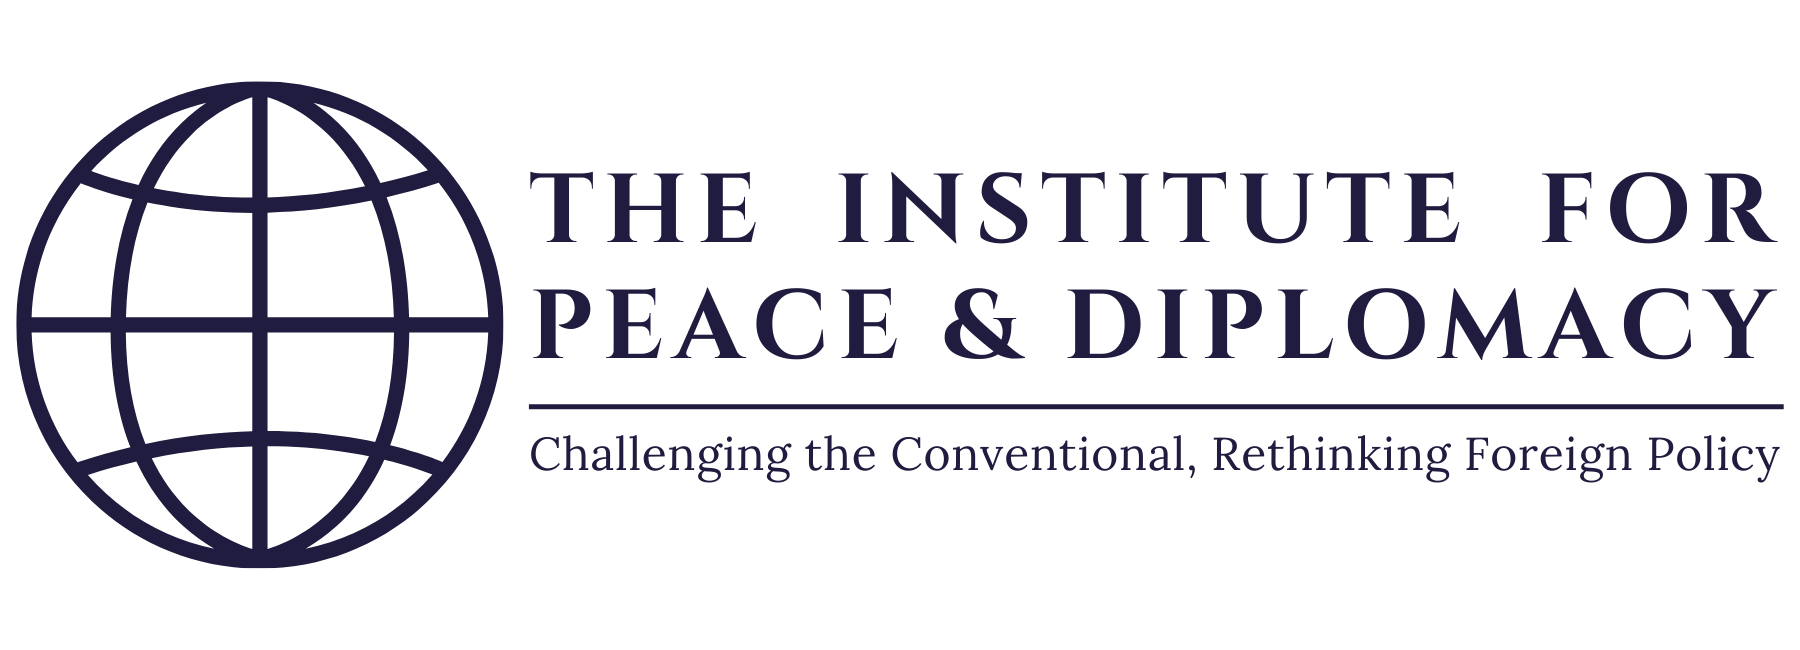 final institute for peace & diplomacy website top logo (ipd) (2).png